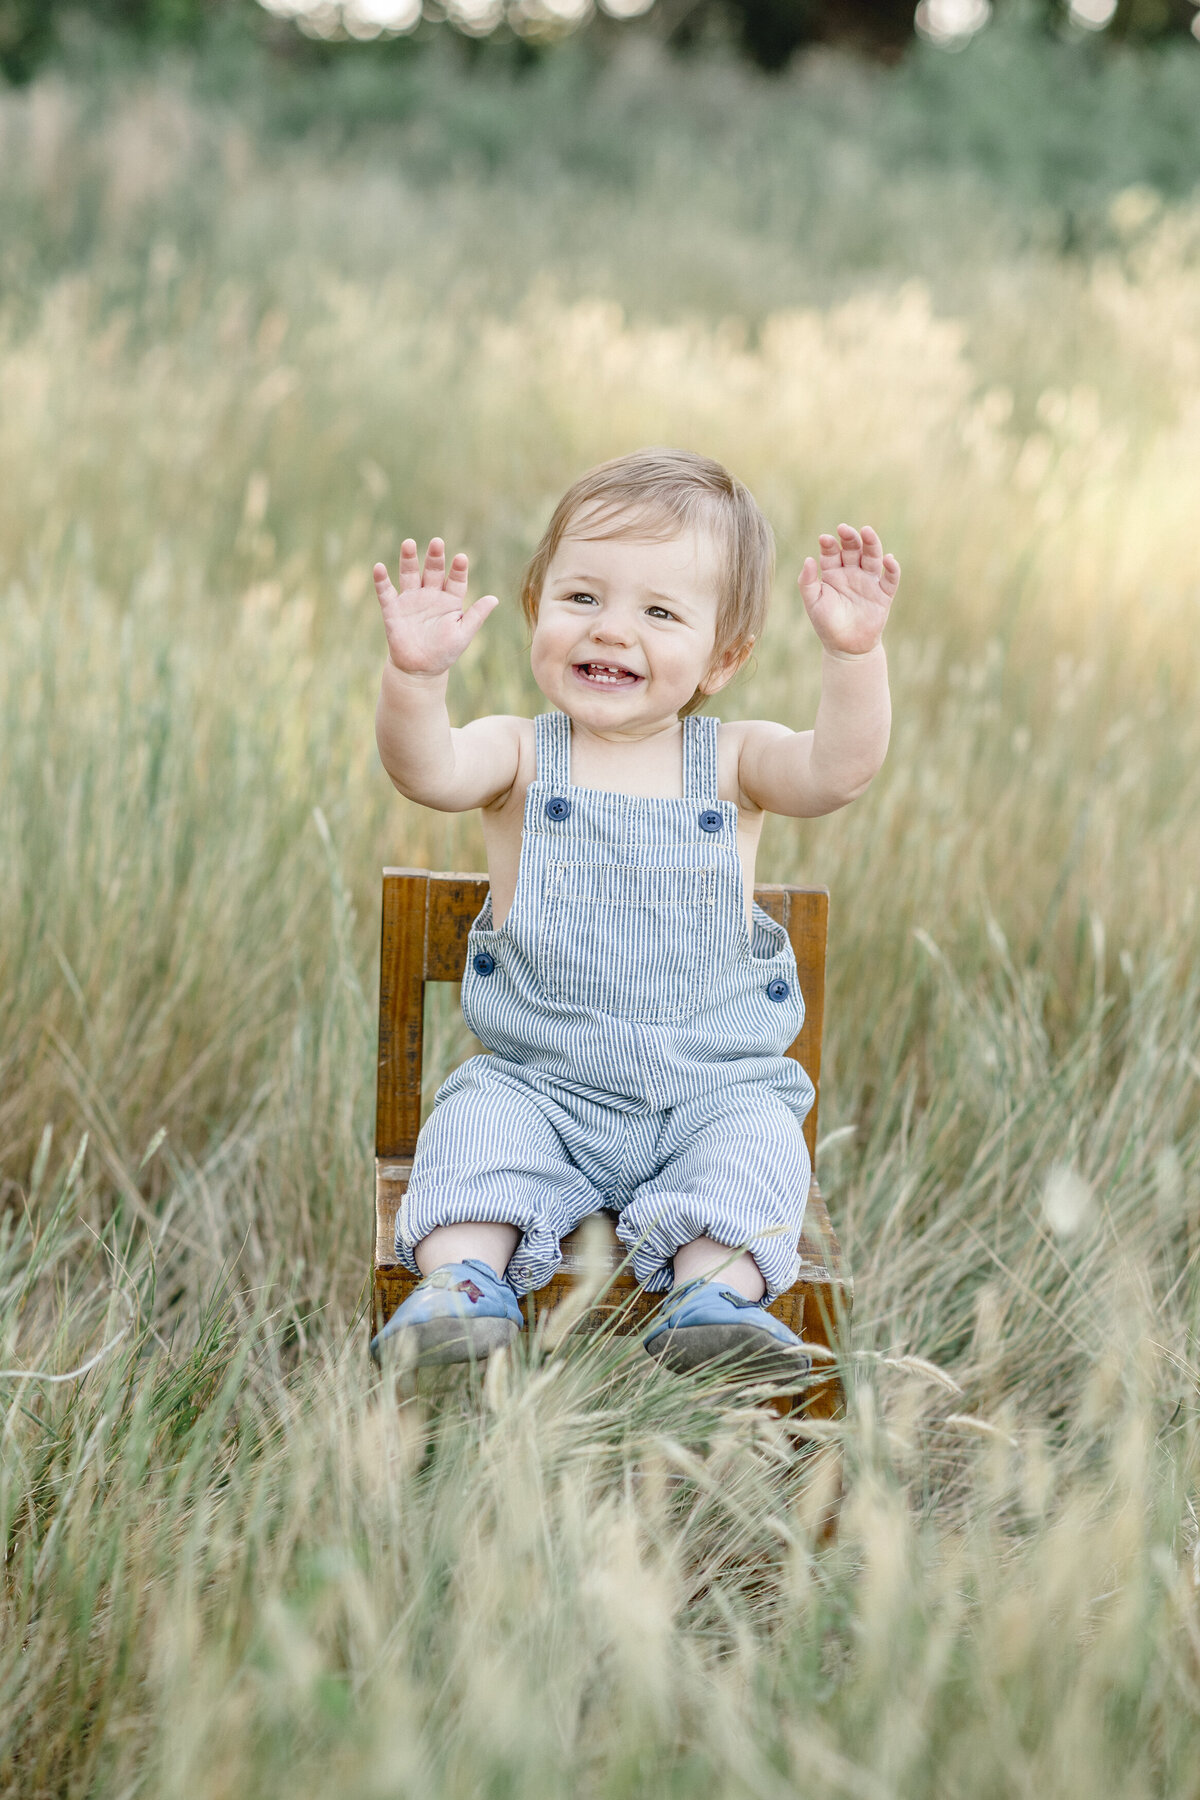 One year old boy in blue overalls on wooden chair in grass field